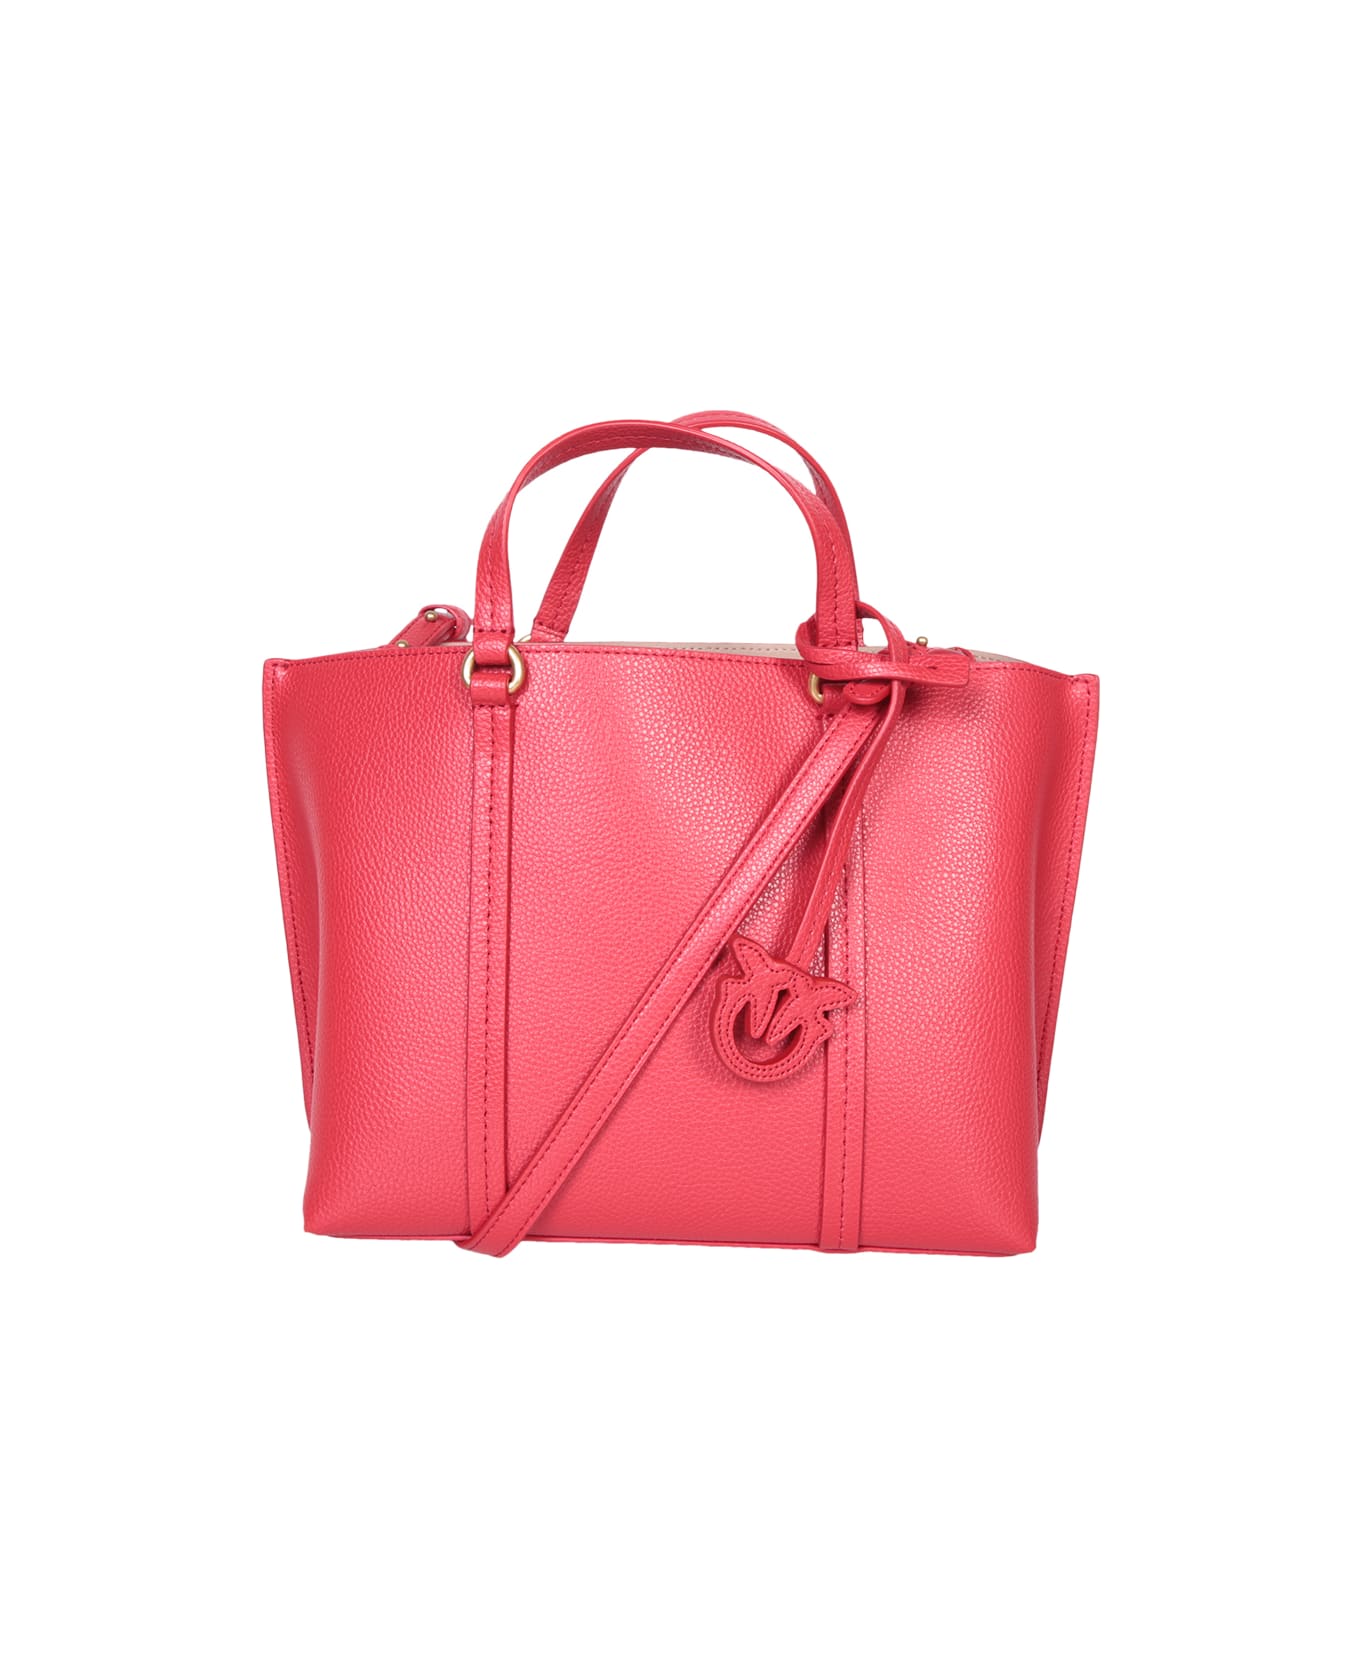 Pinko Pink Carrie Shopper Bag By Pinko - Red